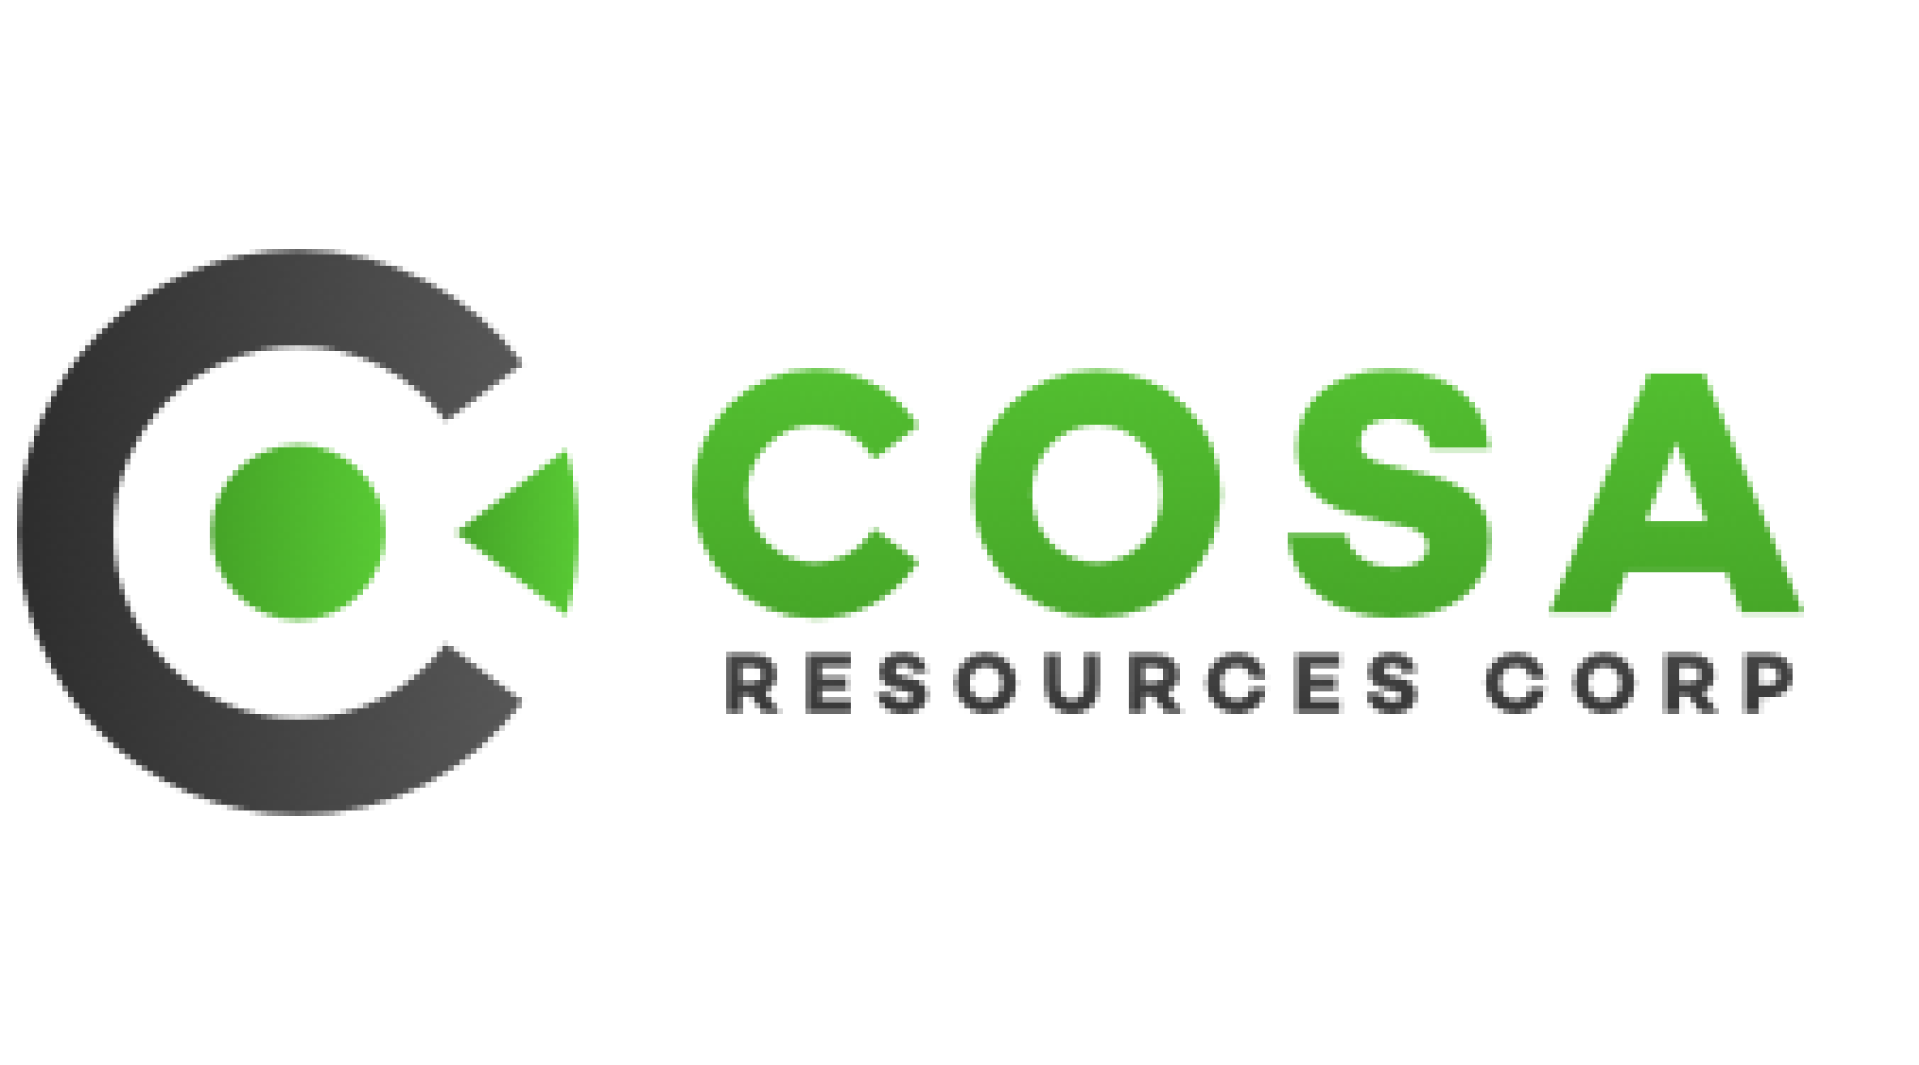 Cosa Resources Corp.